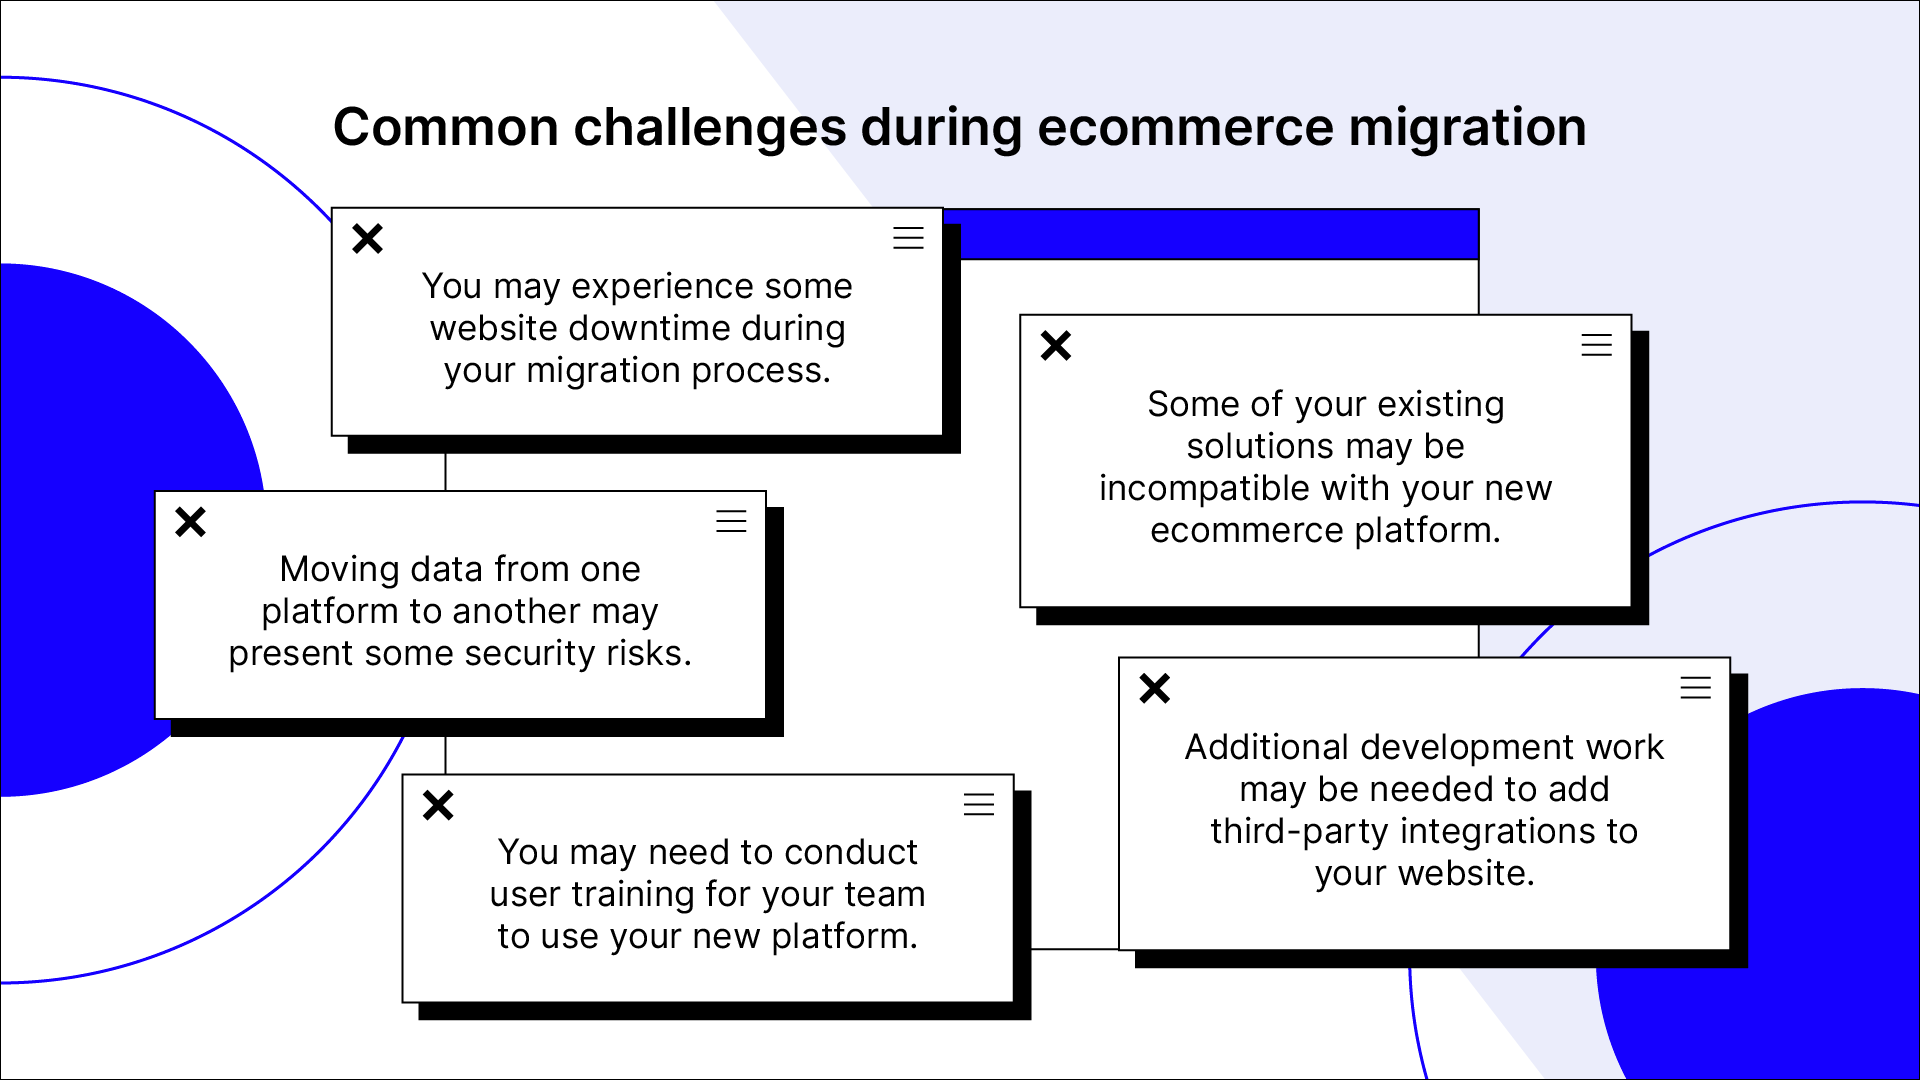 Common challenges during ecommerce migration.